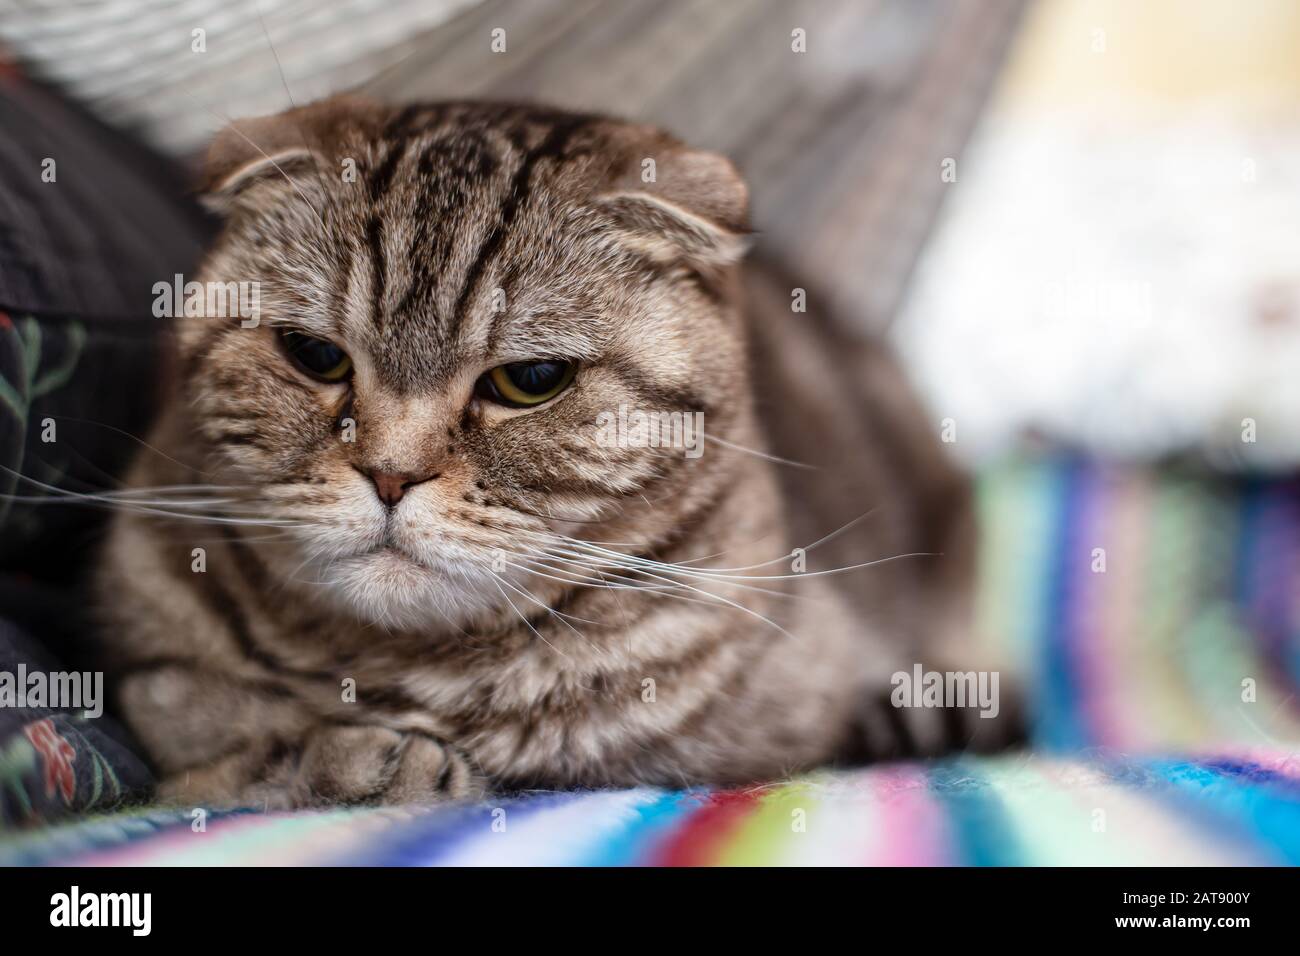 Dissatisfied cat Scottish Fold calmly resting on a multi-colored, knitted plaid and looks thoughtfully. Stock Photo